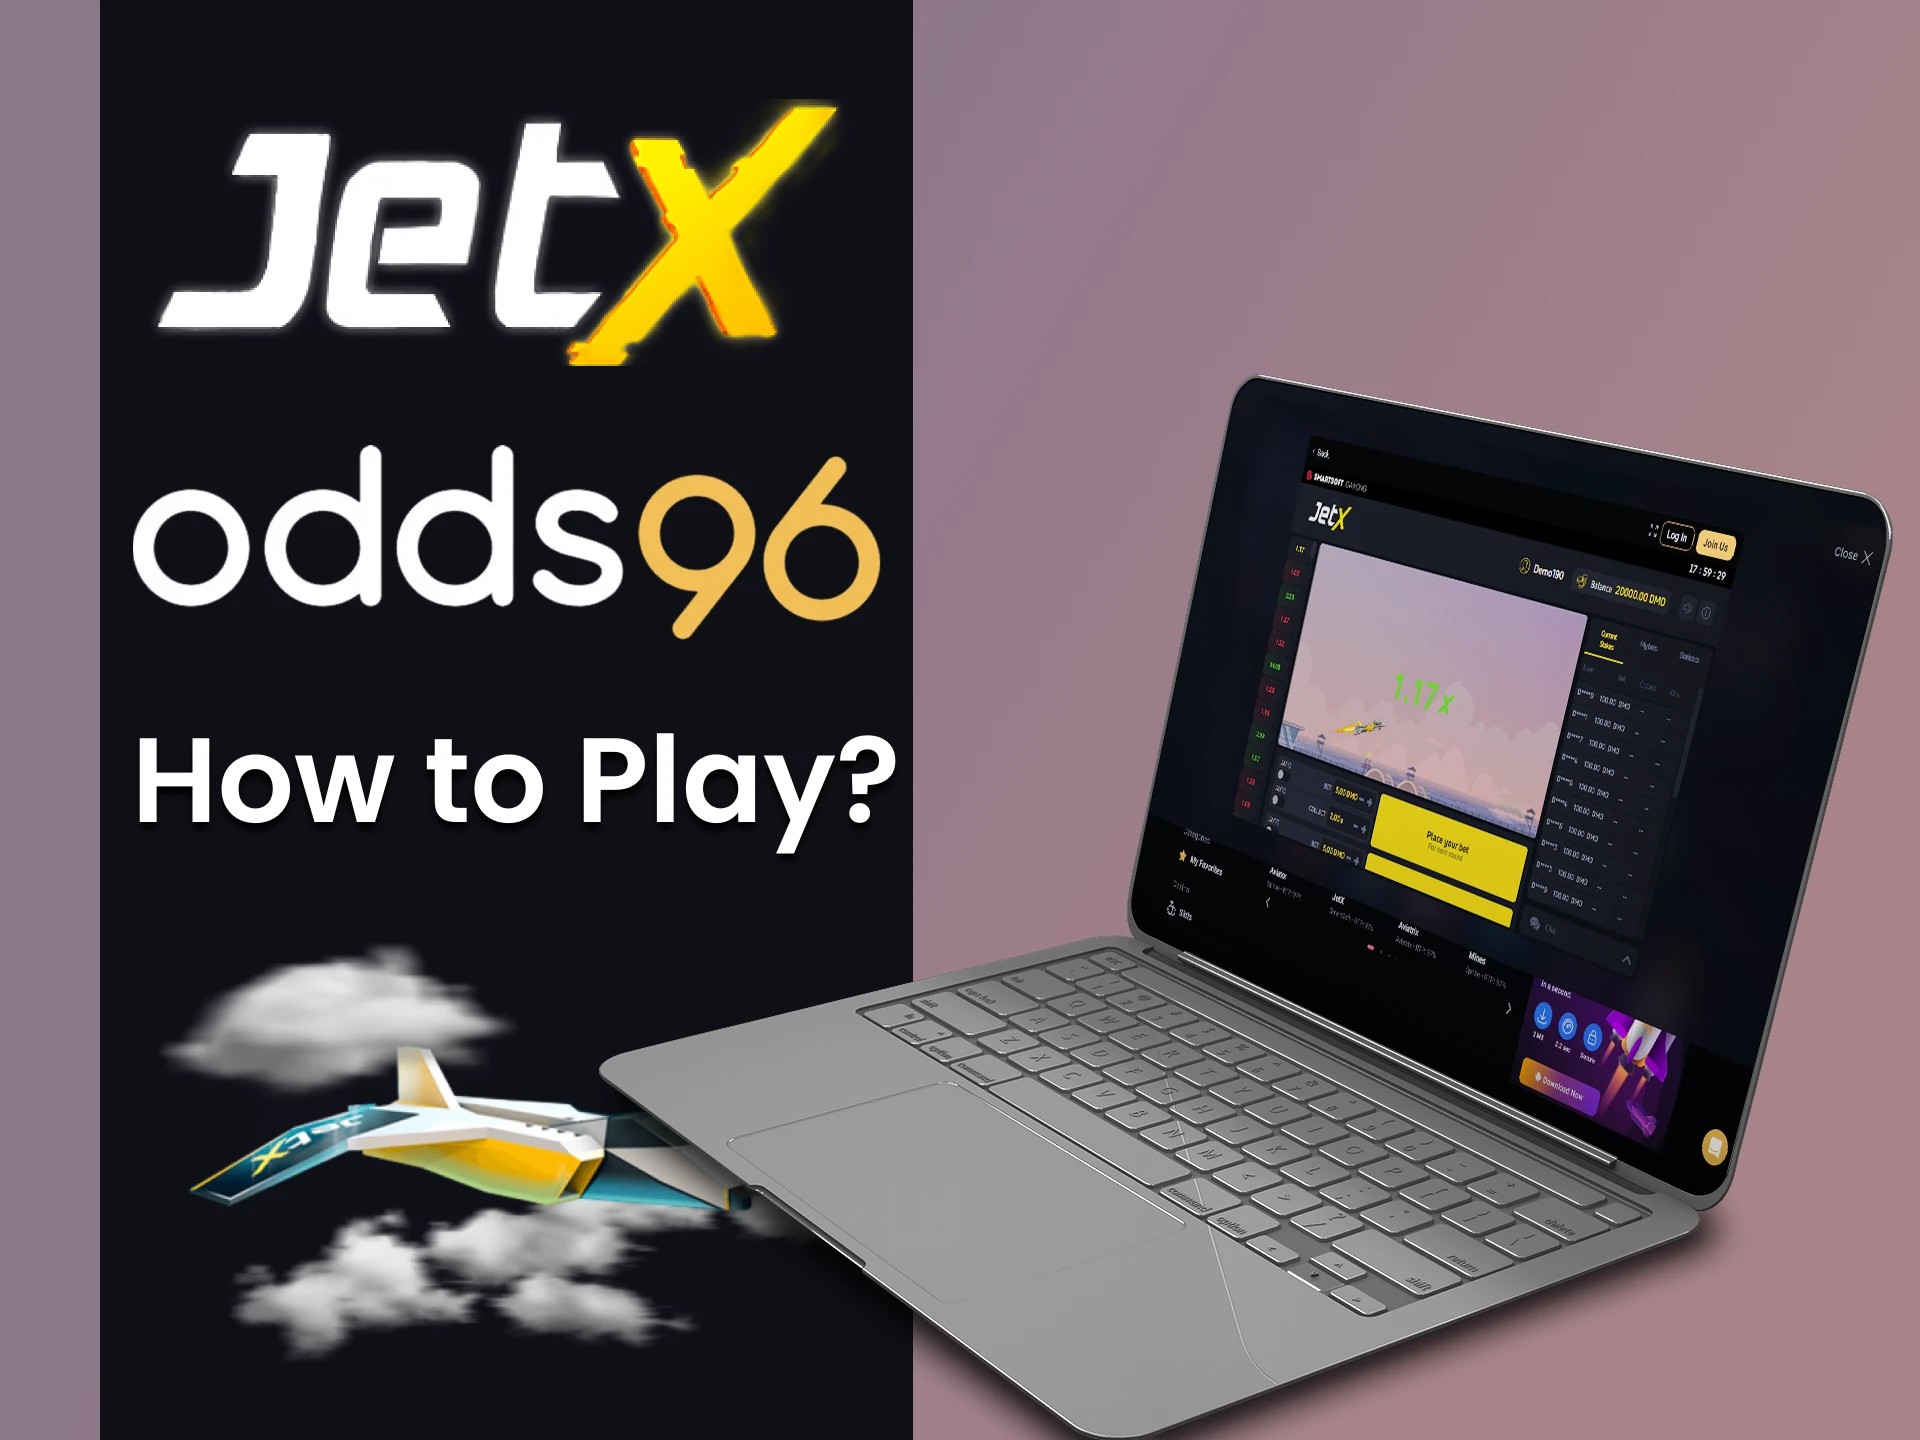 Go to the Odds96 casino section to play JetX.